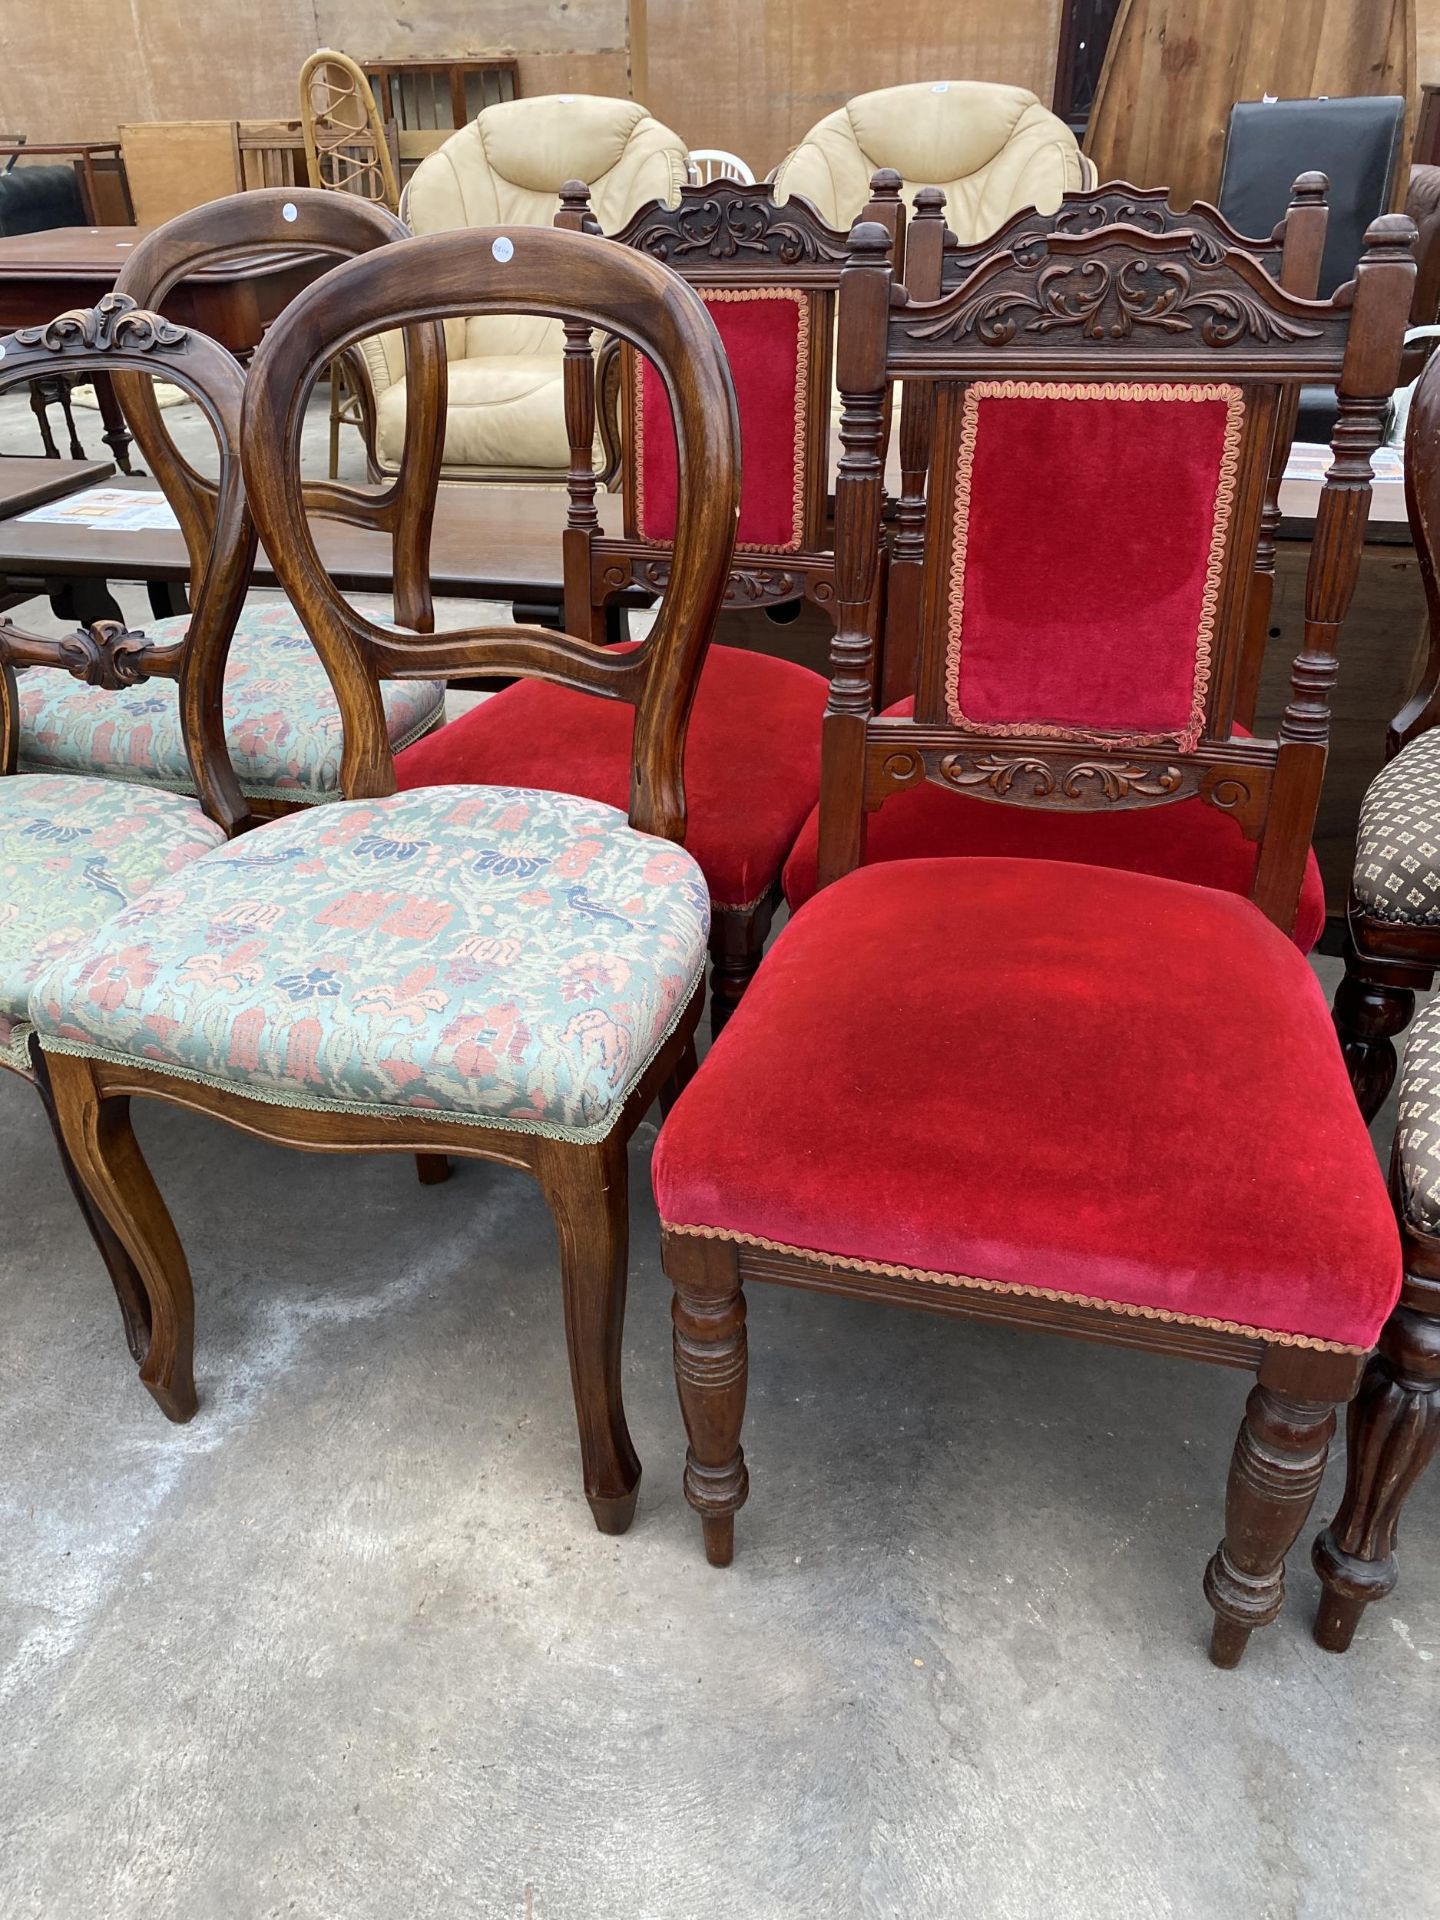 THREE VICTORIAN MAHOGANY DINING CHAIRS WITH CARVED BACK RAILS AND THREE BALLOON BACK CHAIRS - Image 2 of 4